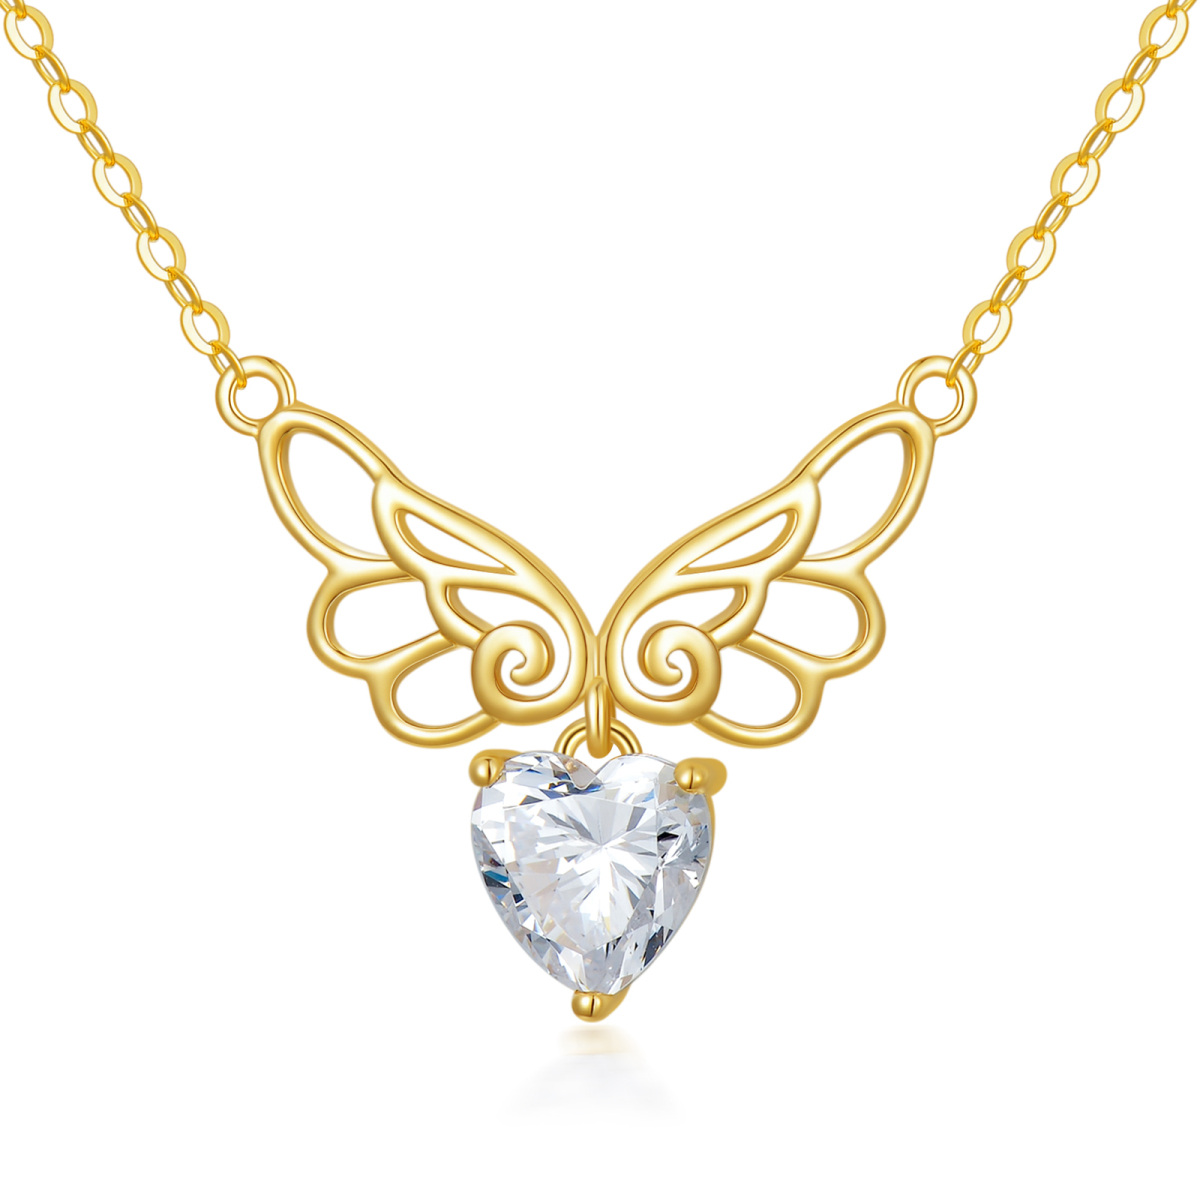 14K Gold Heart Shaped Cubic Zirconia Angel Wing Pendant Necklace-1